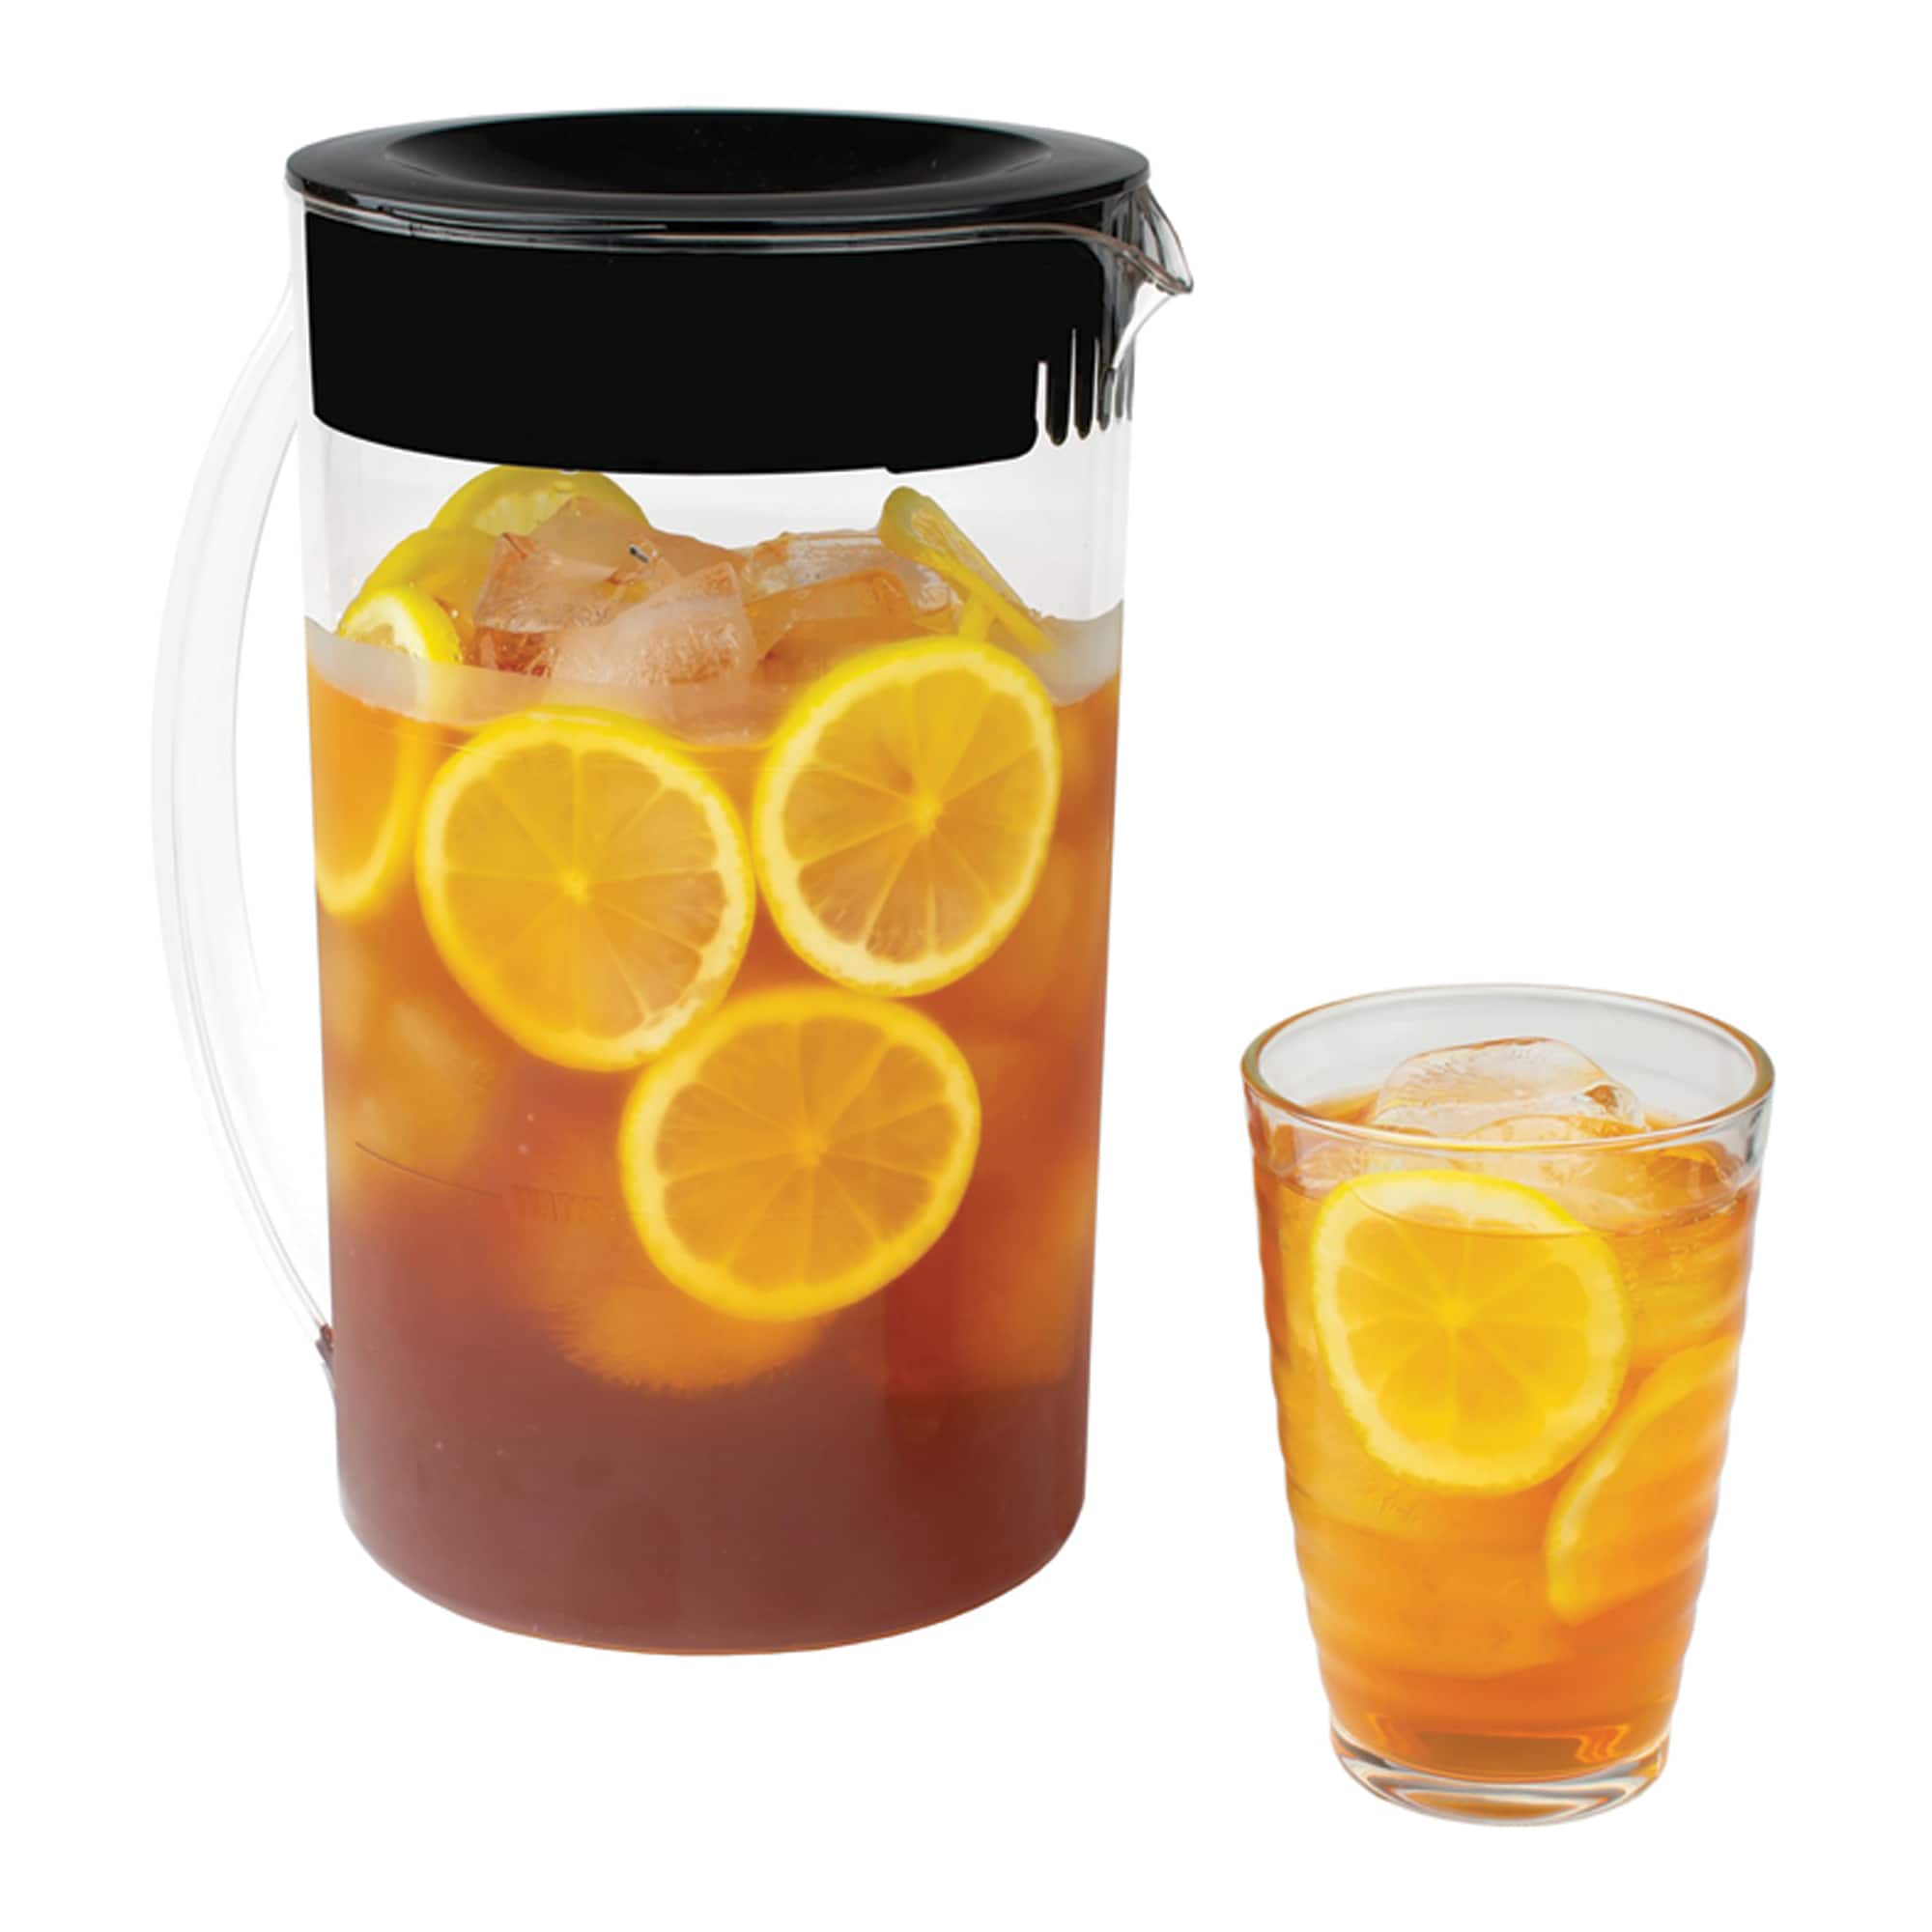 Brentwood KT-2150BK Black Iced Tea and Coffee Maker with 64oz